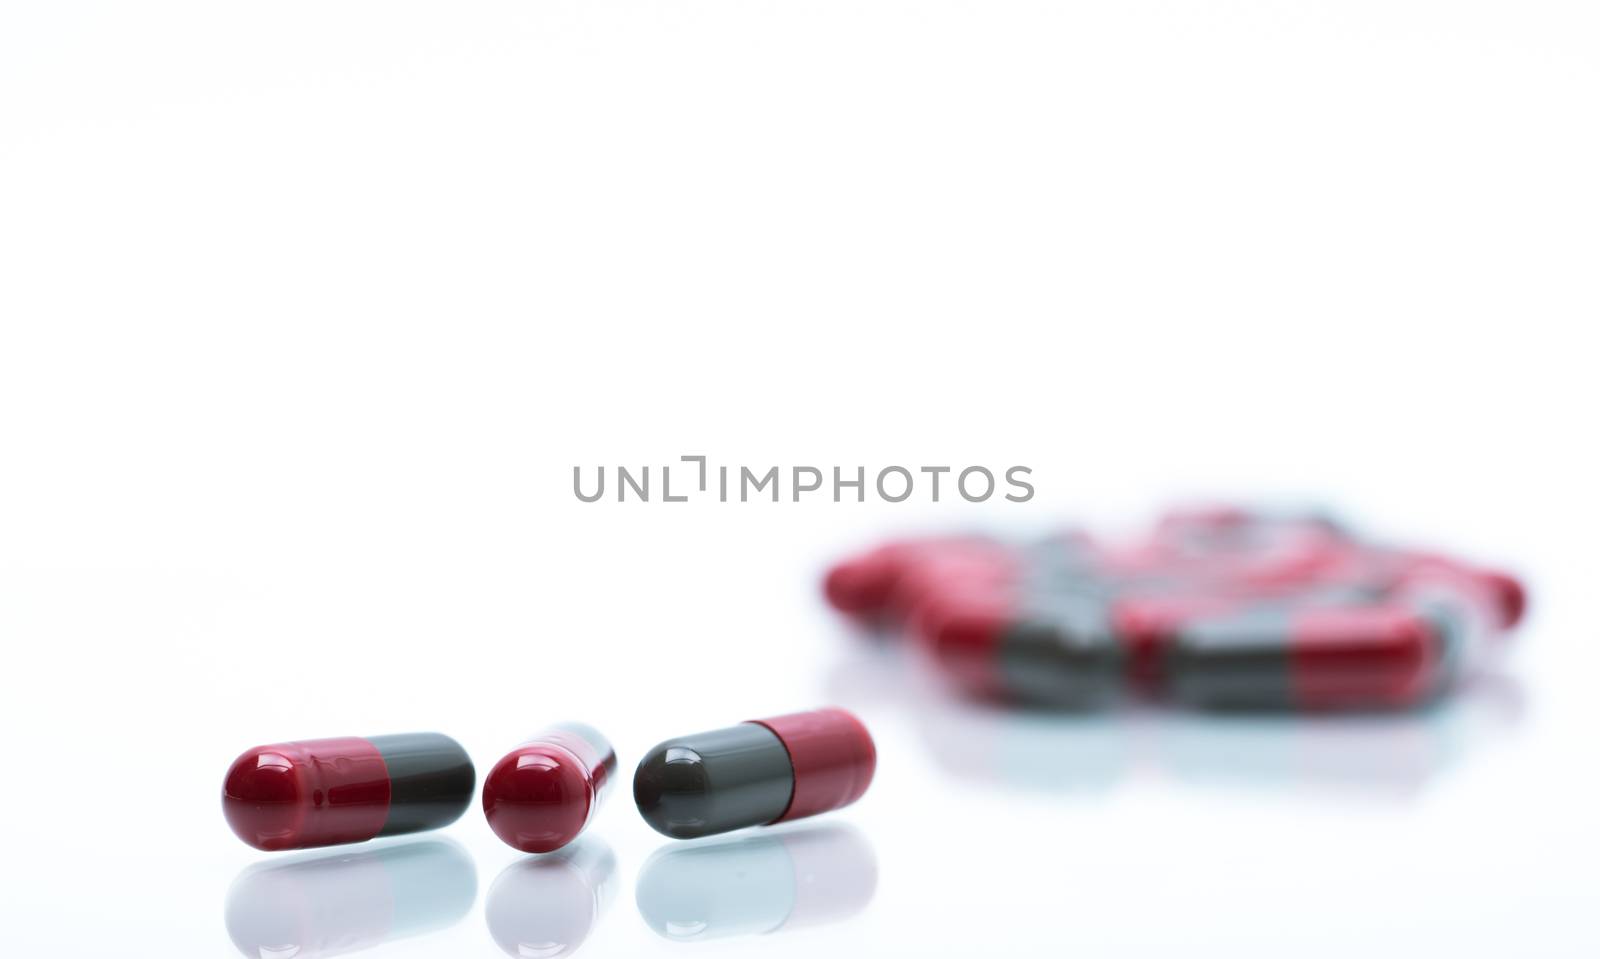 Macro shot detail selective focus of red and grey capsule pills on white background with blurred capsule. Migraine prophylaxis treatment concept. Pharmaceutical industry. Pharmacy background. Global healthcare concept.